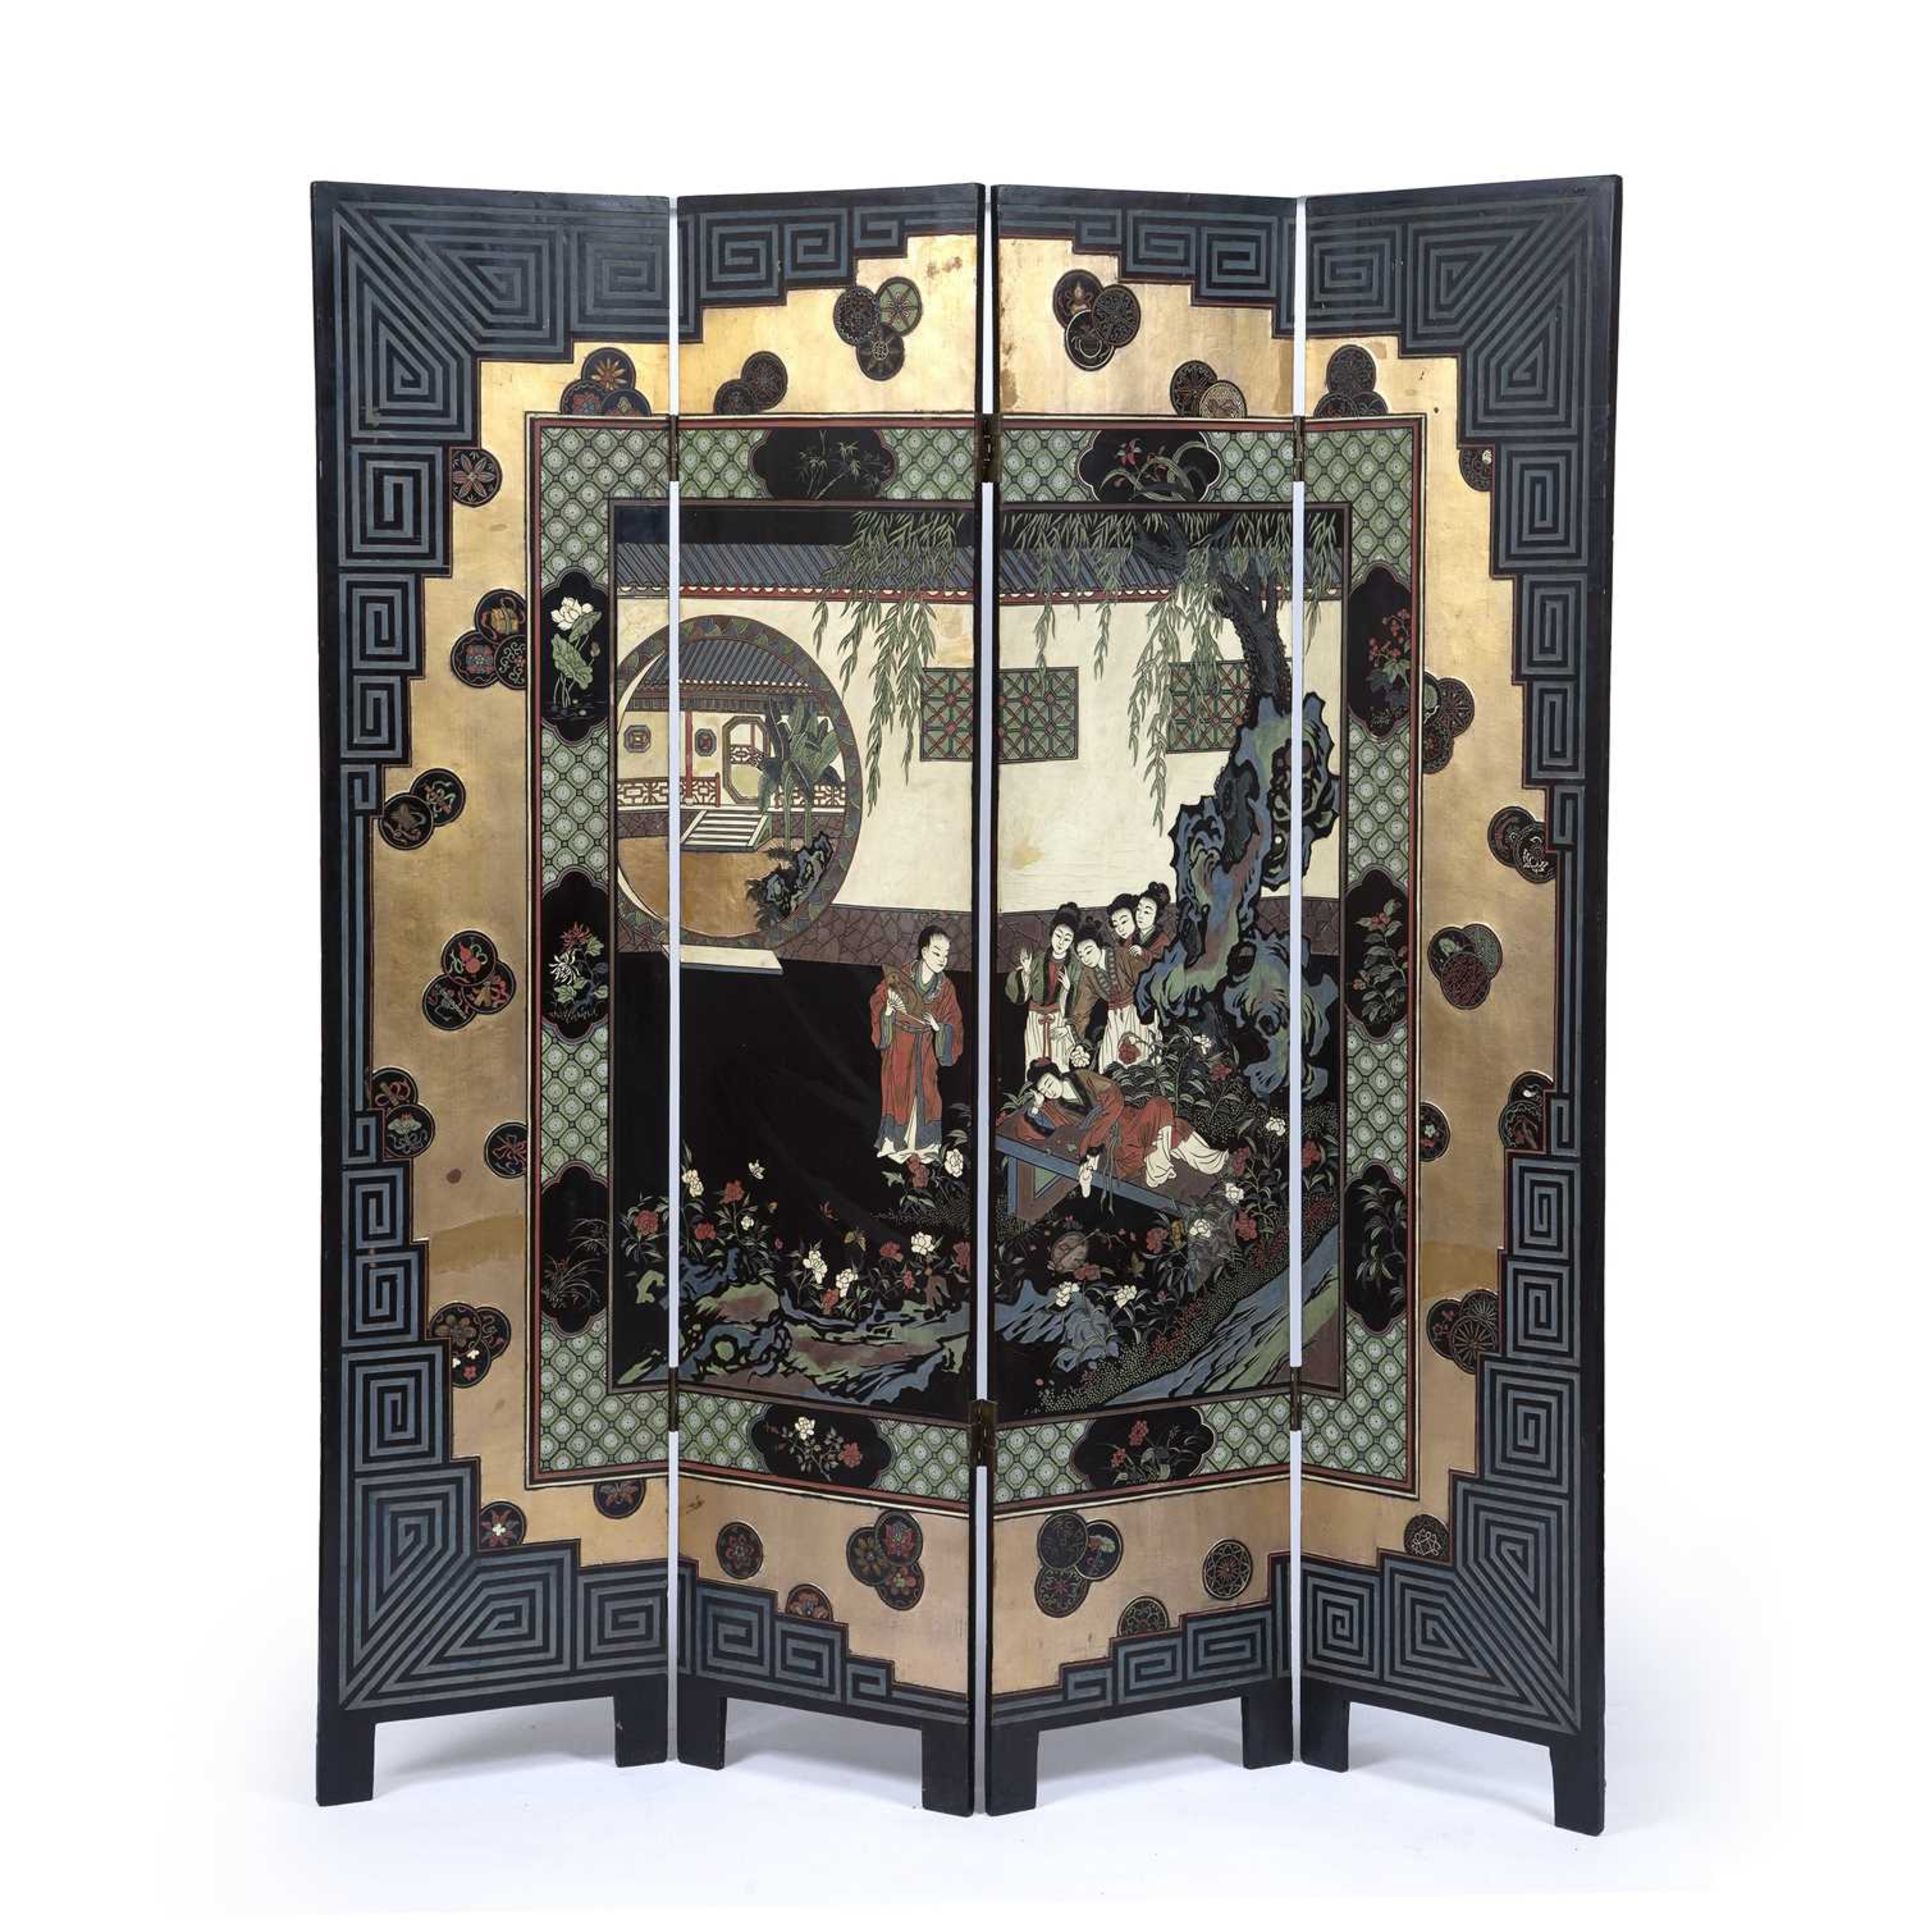 Coromandel lacquer four fold screen Chinese, the double sides decorated with figures, foliate and